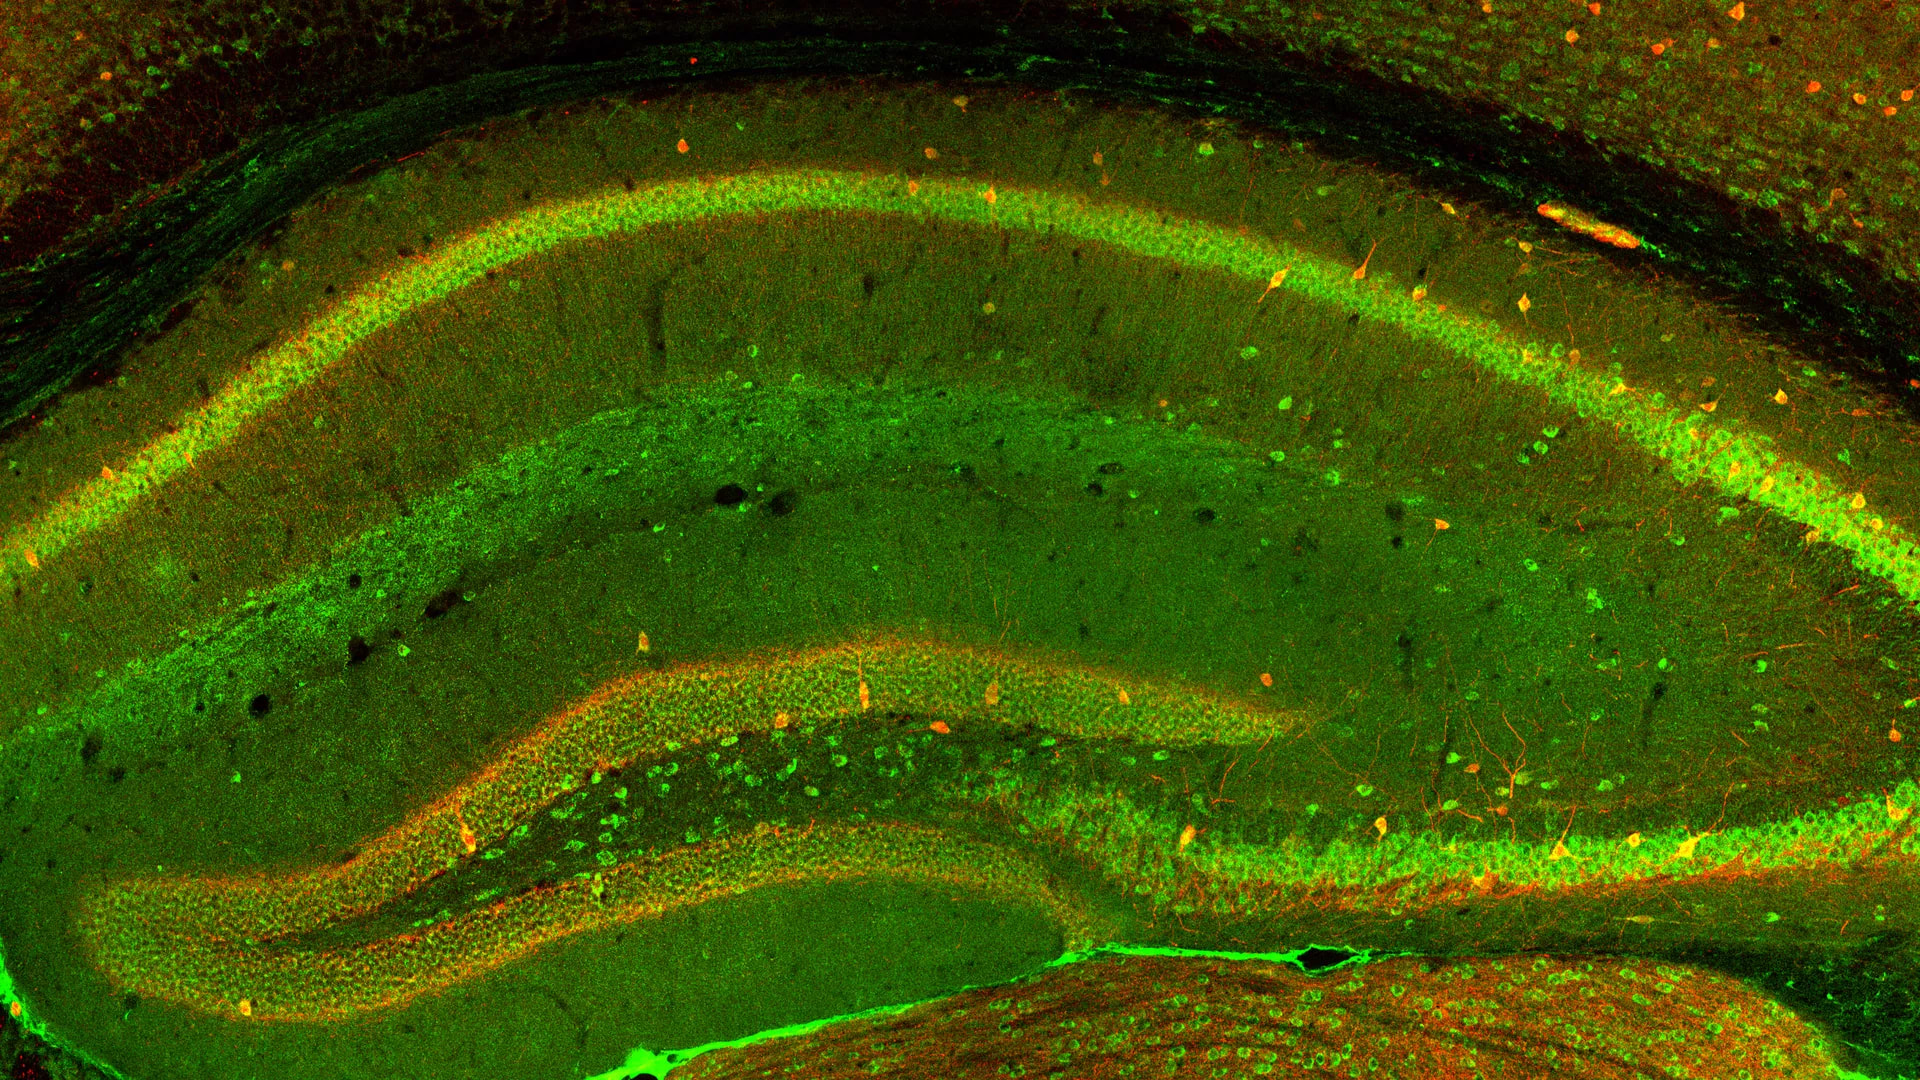 Cover image for "Reviews in Cellular Neurophysiology 2022: Neurophysiological mechanisms in the developing and adult rodent brain"